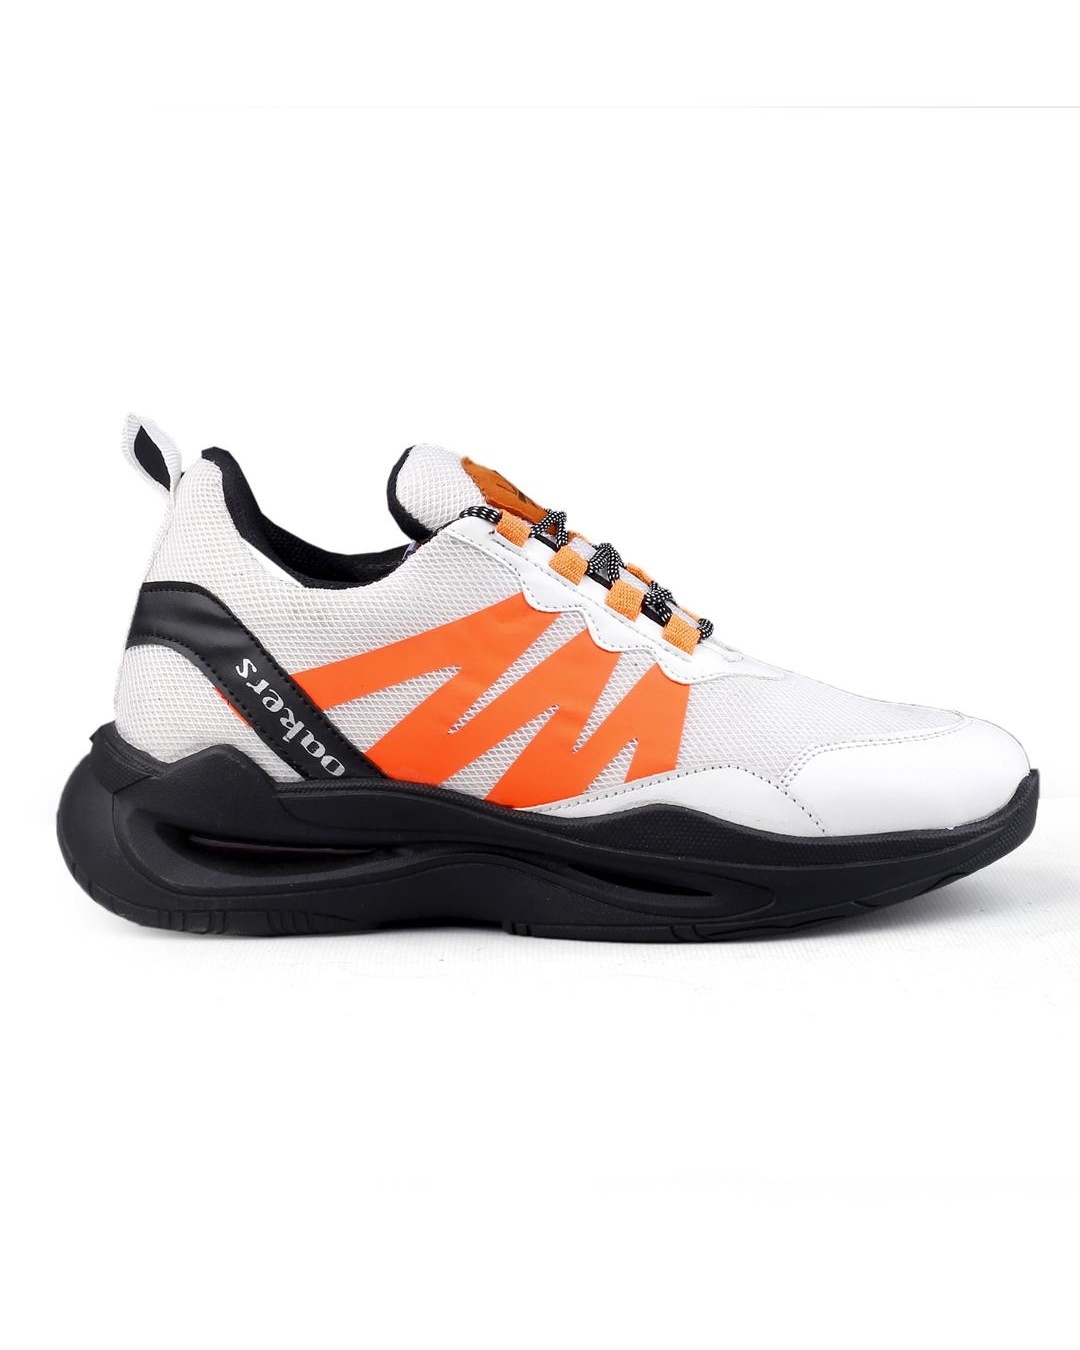 Buy Men's White & Orange Color Block Casual Shoes Online in India at ...